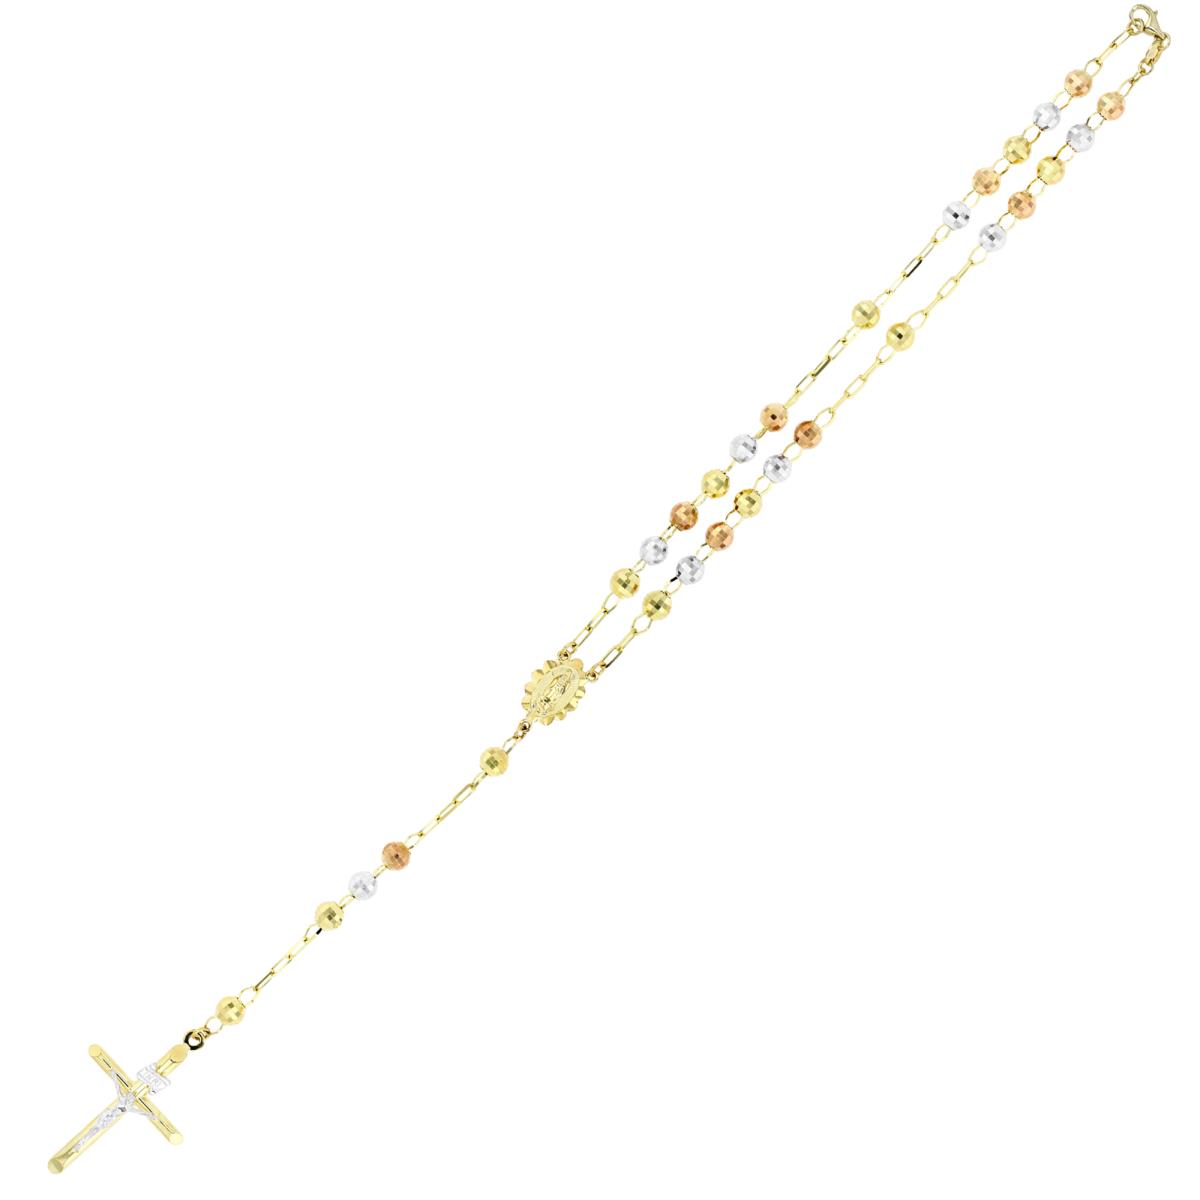 14K Gold Tricolor 5MM Diamond Cut Beads Rosary 26" Necklace